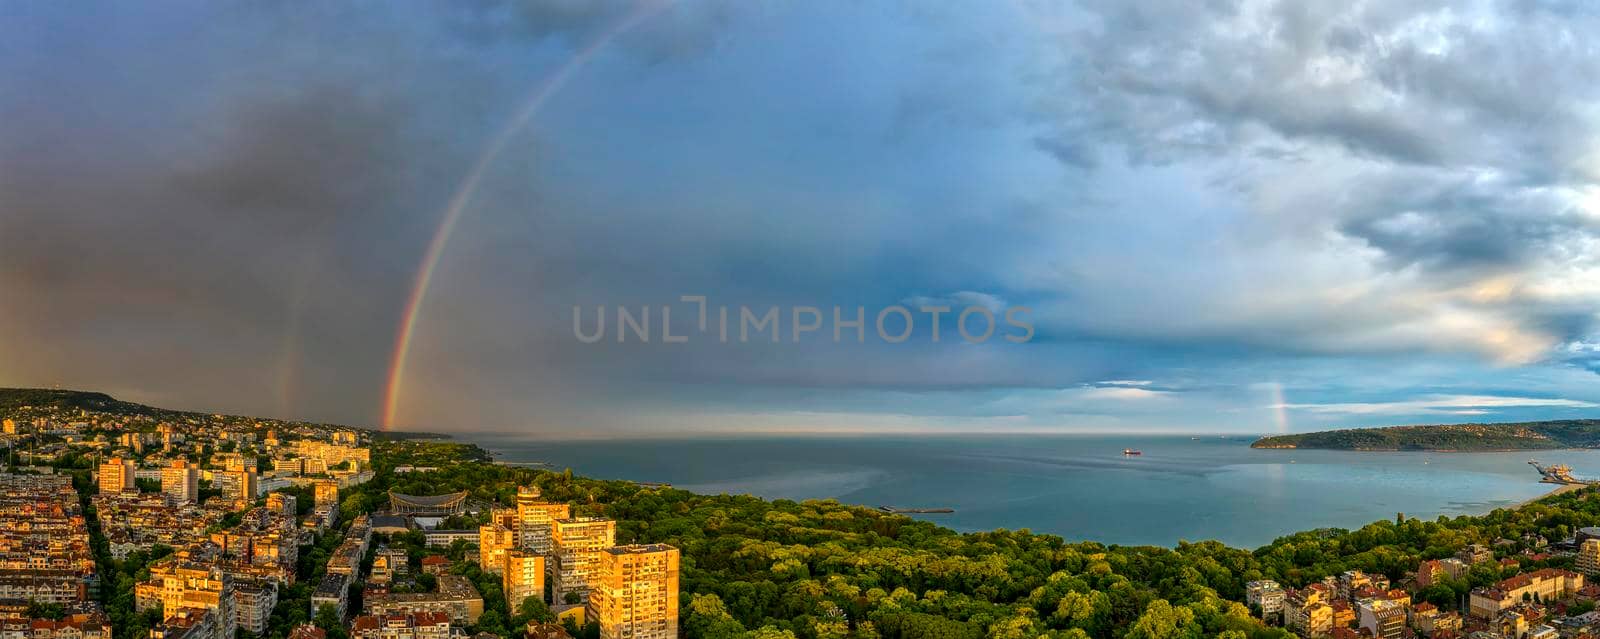 Stunning panorama of a  big rainbow over the sea and coast after the rain 